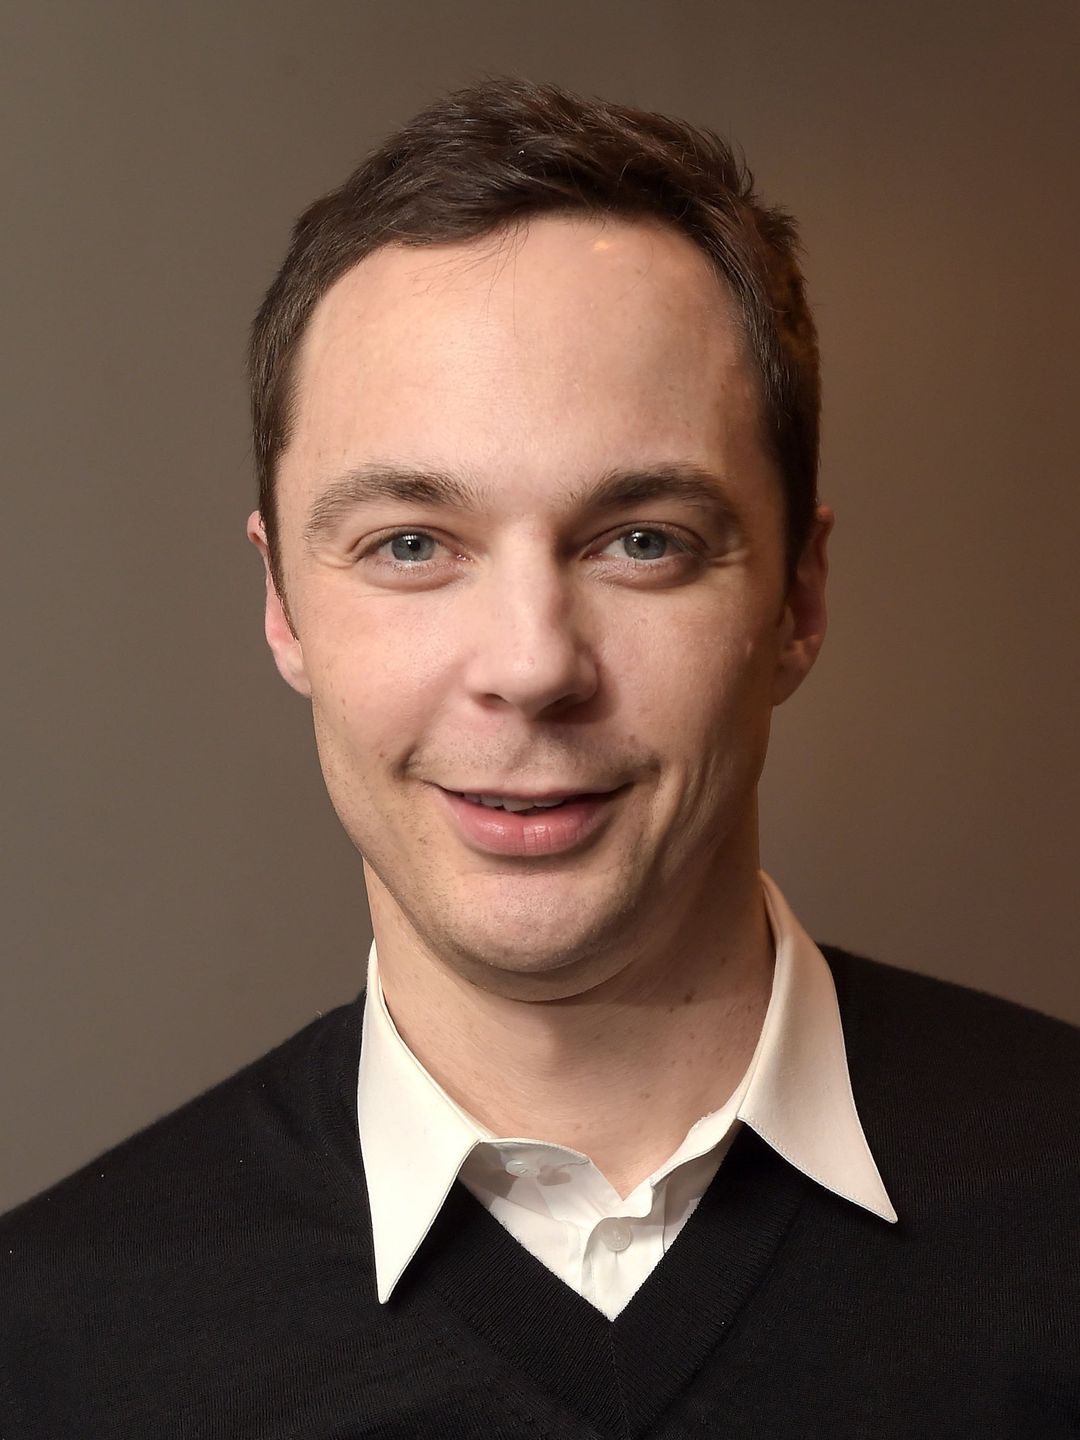 Jim Parsons early career